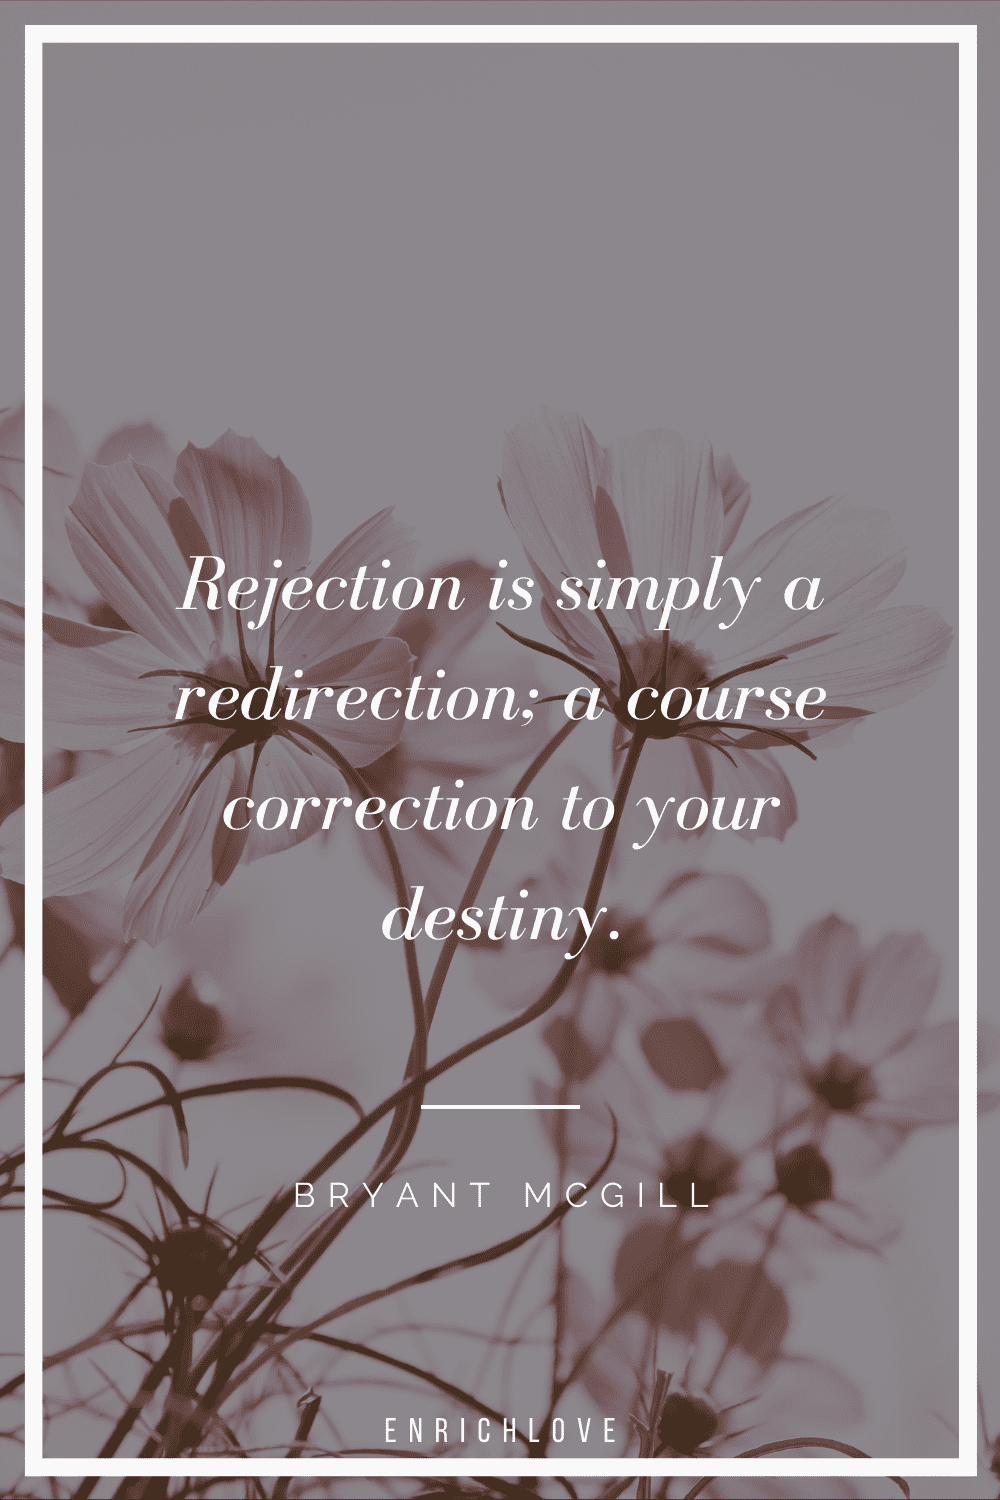 Rejection is simply a redirection; a course correction to your destiny.